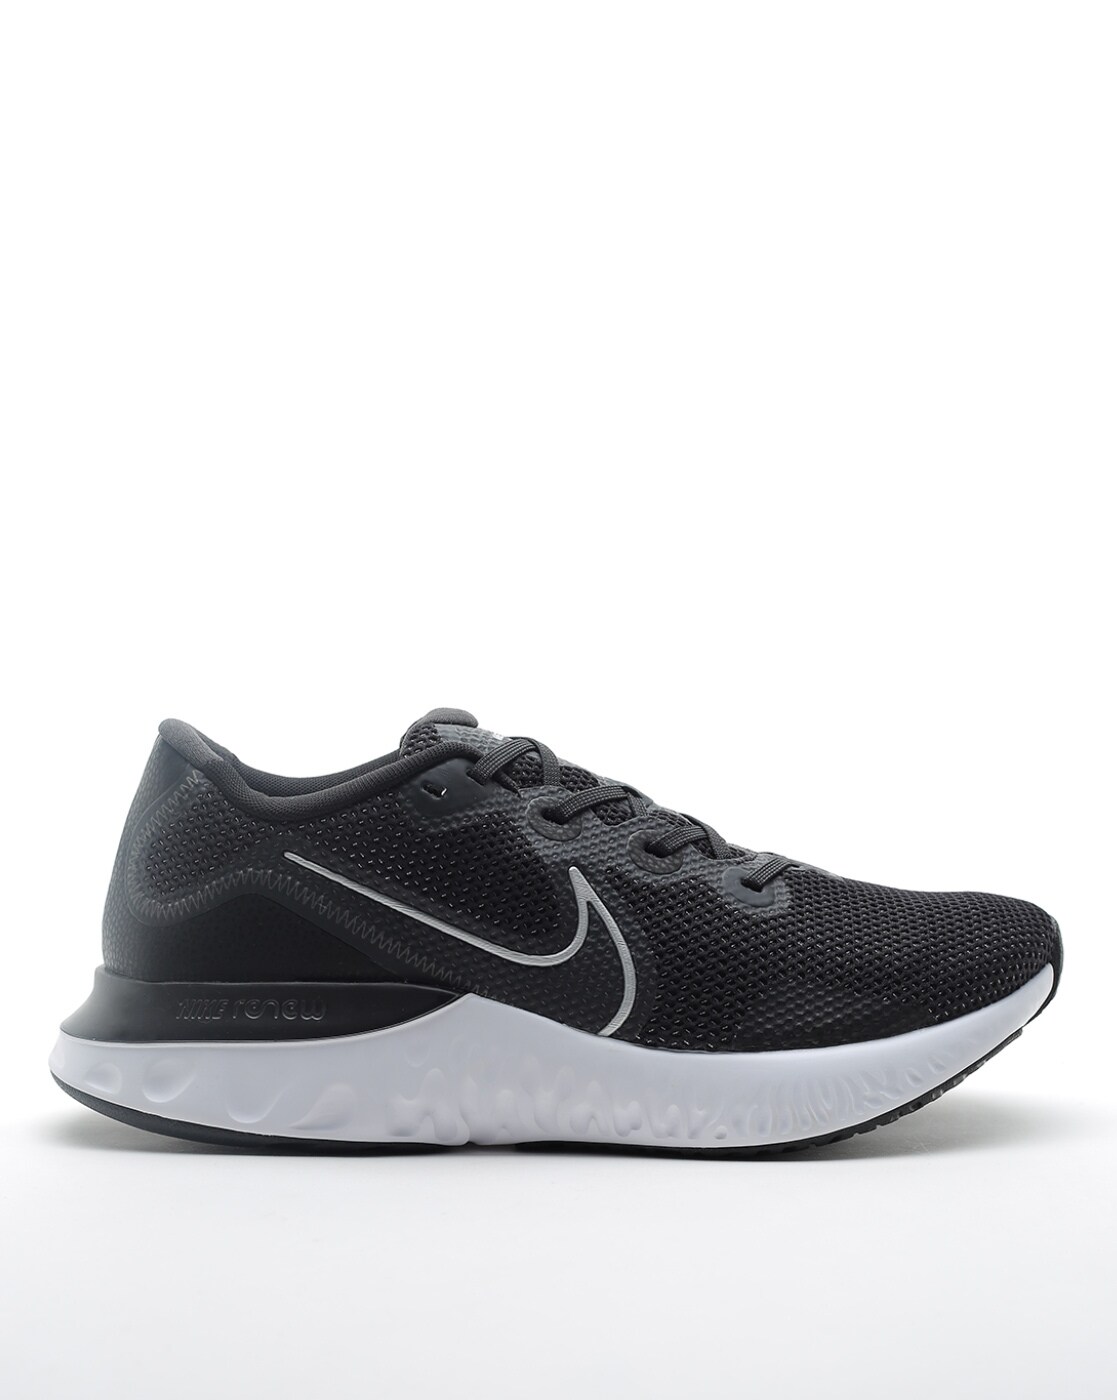 discount running shoes online